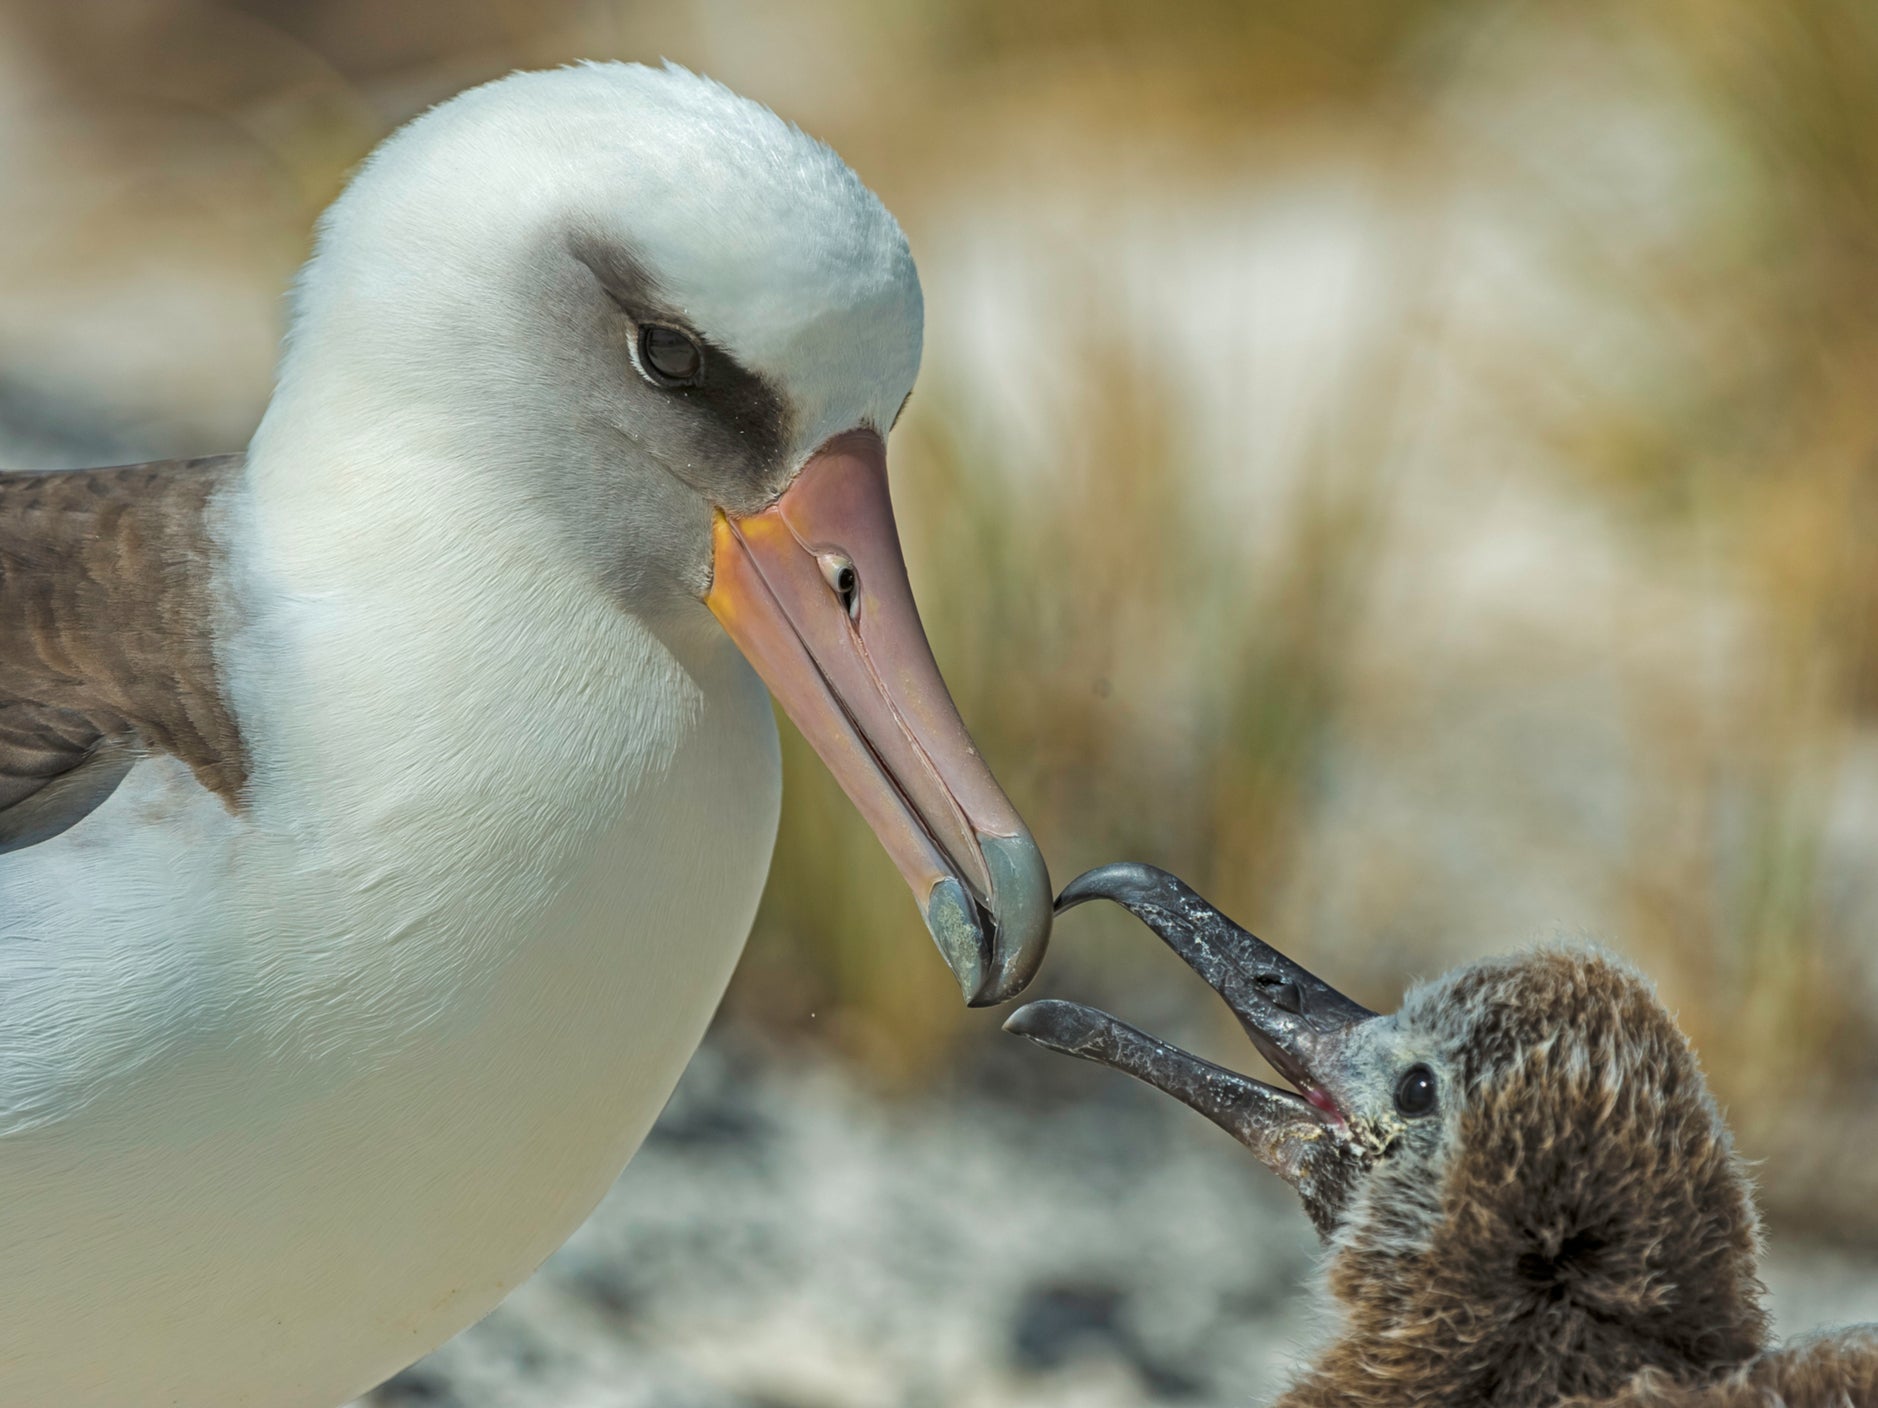 A Laysan albatross feeds its chick on Midway Atoll in the North Pacific. Albatrosses do not rear chicks every year